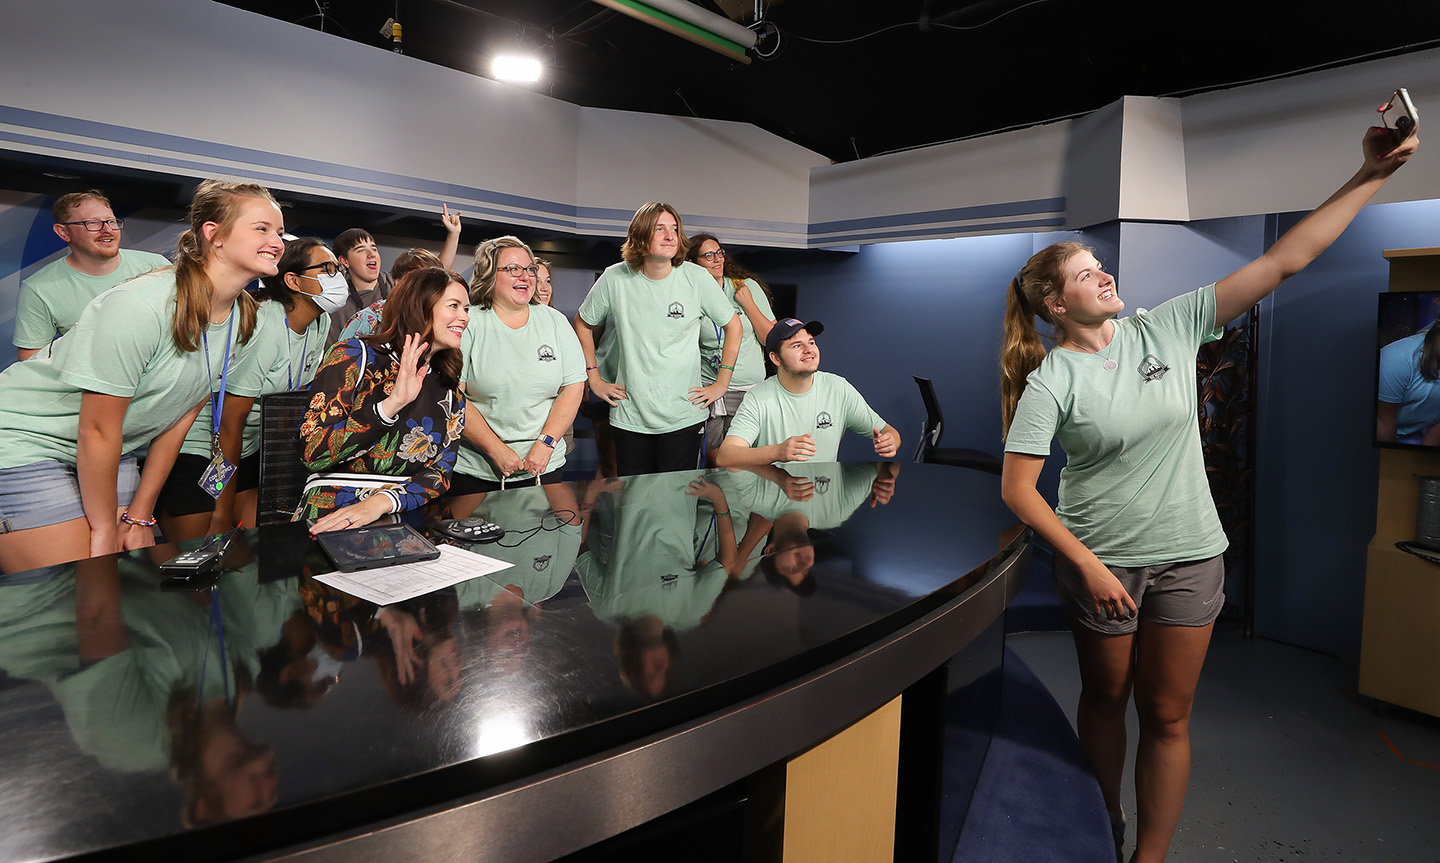 Grace McDonald, right, takes a photo with NTV news anchor Colleen Williams and high school students participating in the Digital Expressions Media Camp. McDonald served as a counselor for the weeklong summer camp.